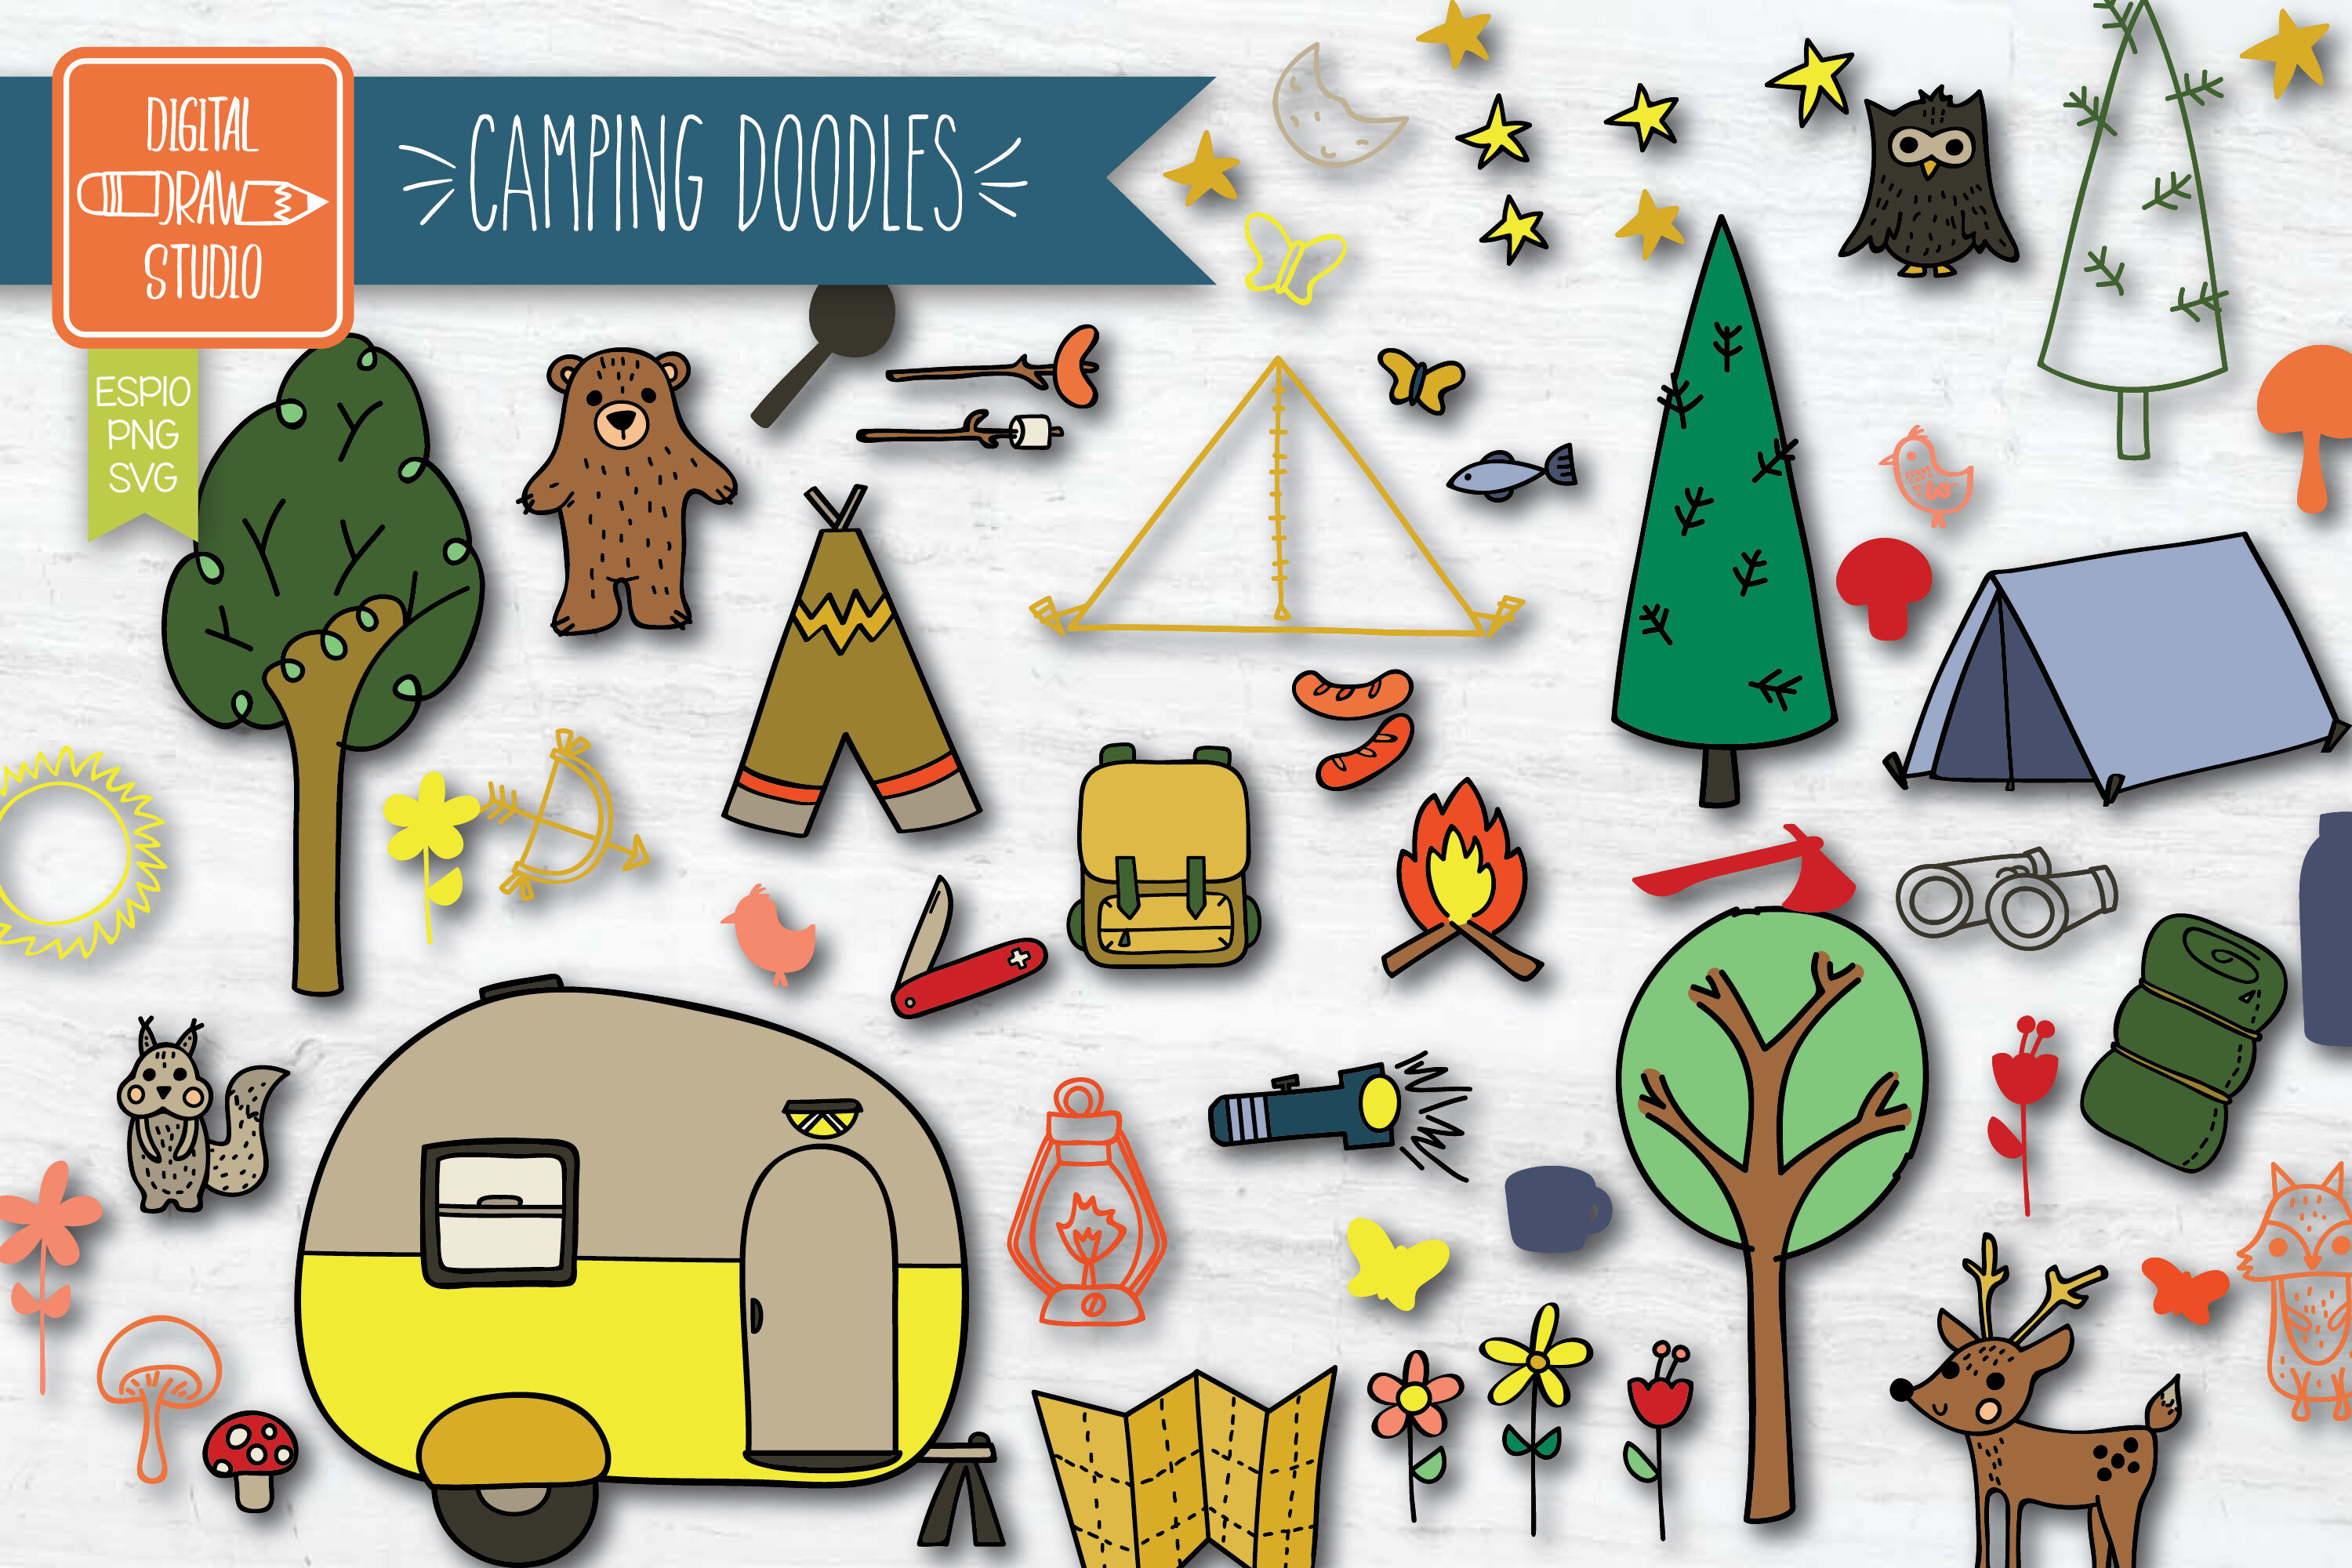 Hand Drawn Camping Colored Outdoor Illustration Woodland Clip Art By Digital Draw Studio Thehungryjpeg Com